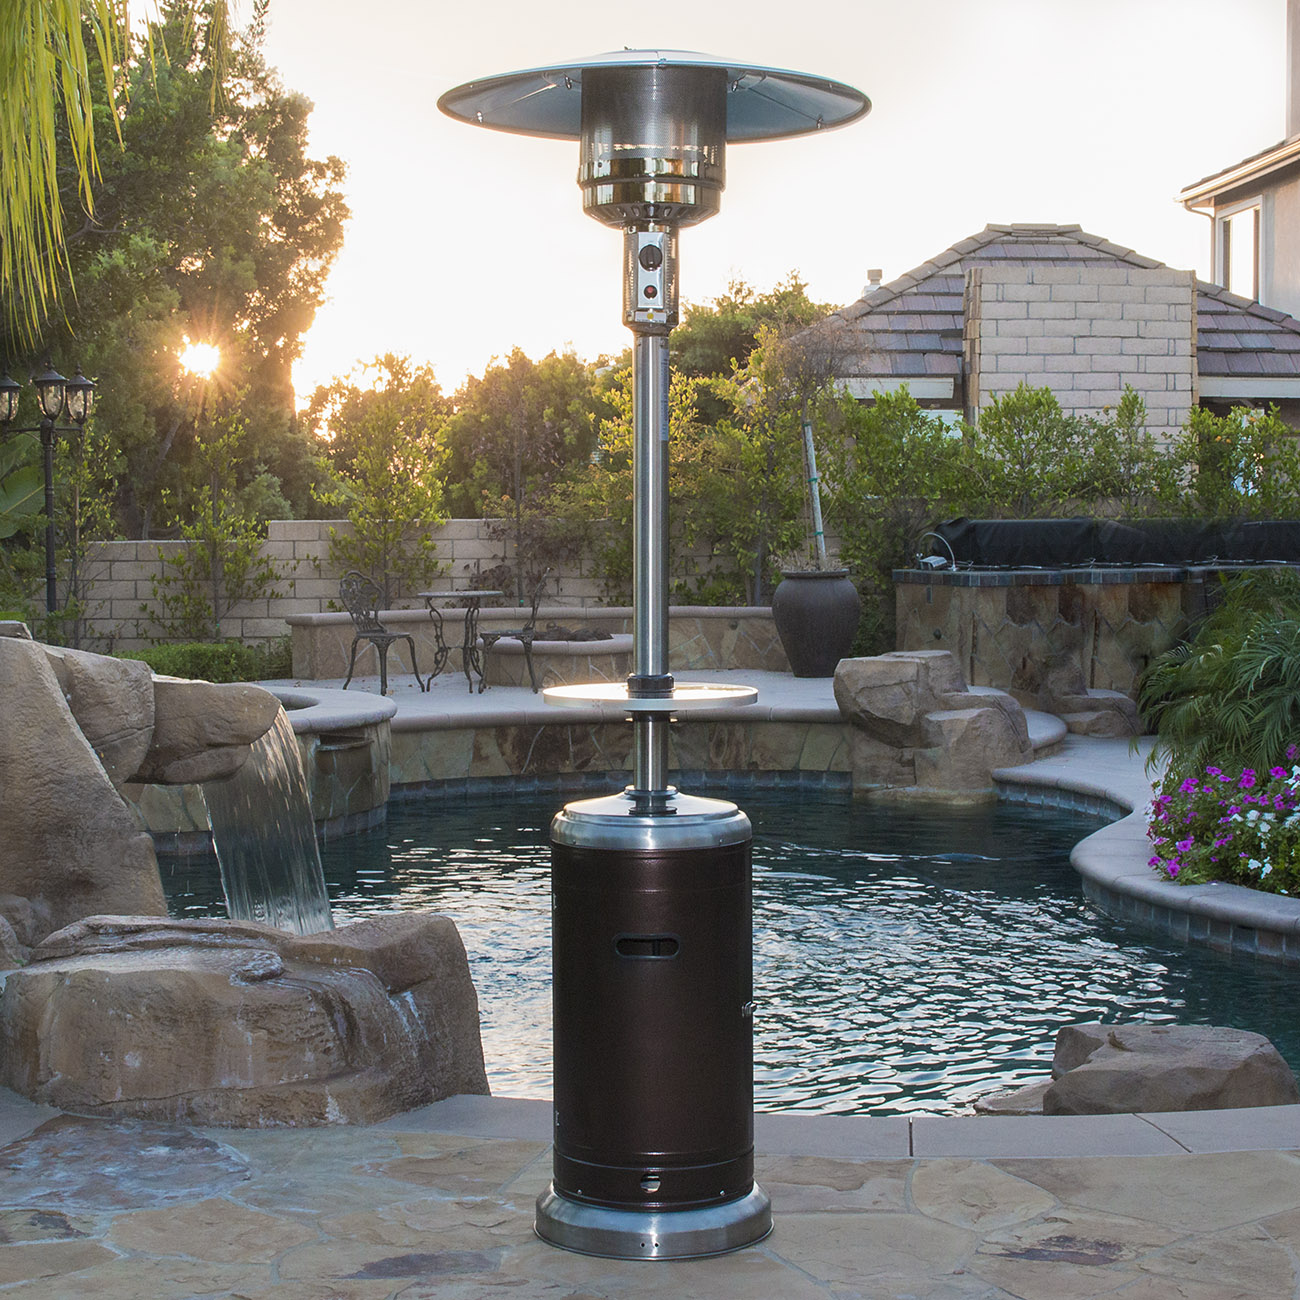 A stainless steel patio heater by a pool. Links to the best patio heaters on Walmart.com.